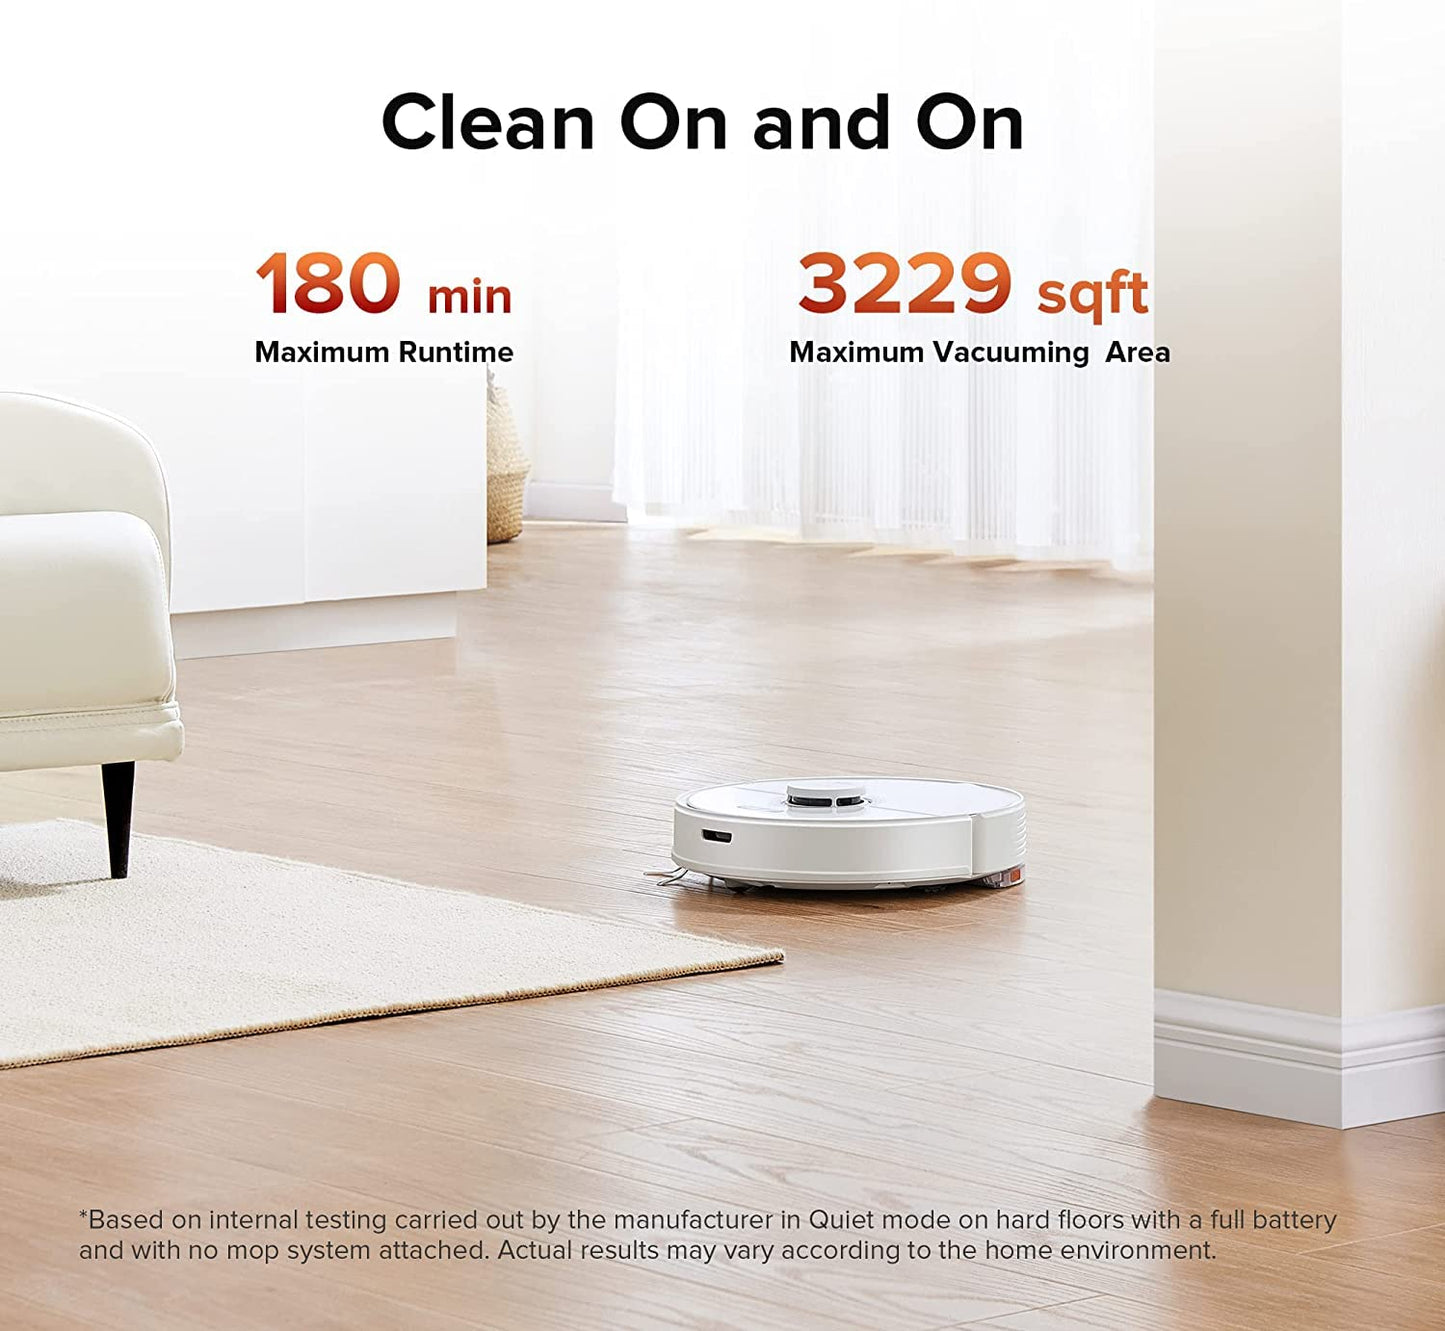 roborock Q7 Max Robot Vacuum and Mop Cleaner, 4200Pa Strong Suction, Lidar Navigation, Multi-Level Mapping,